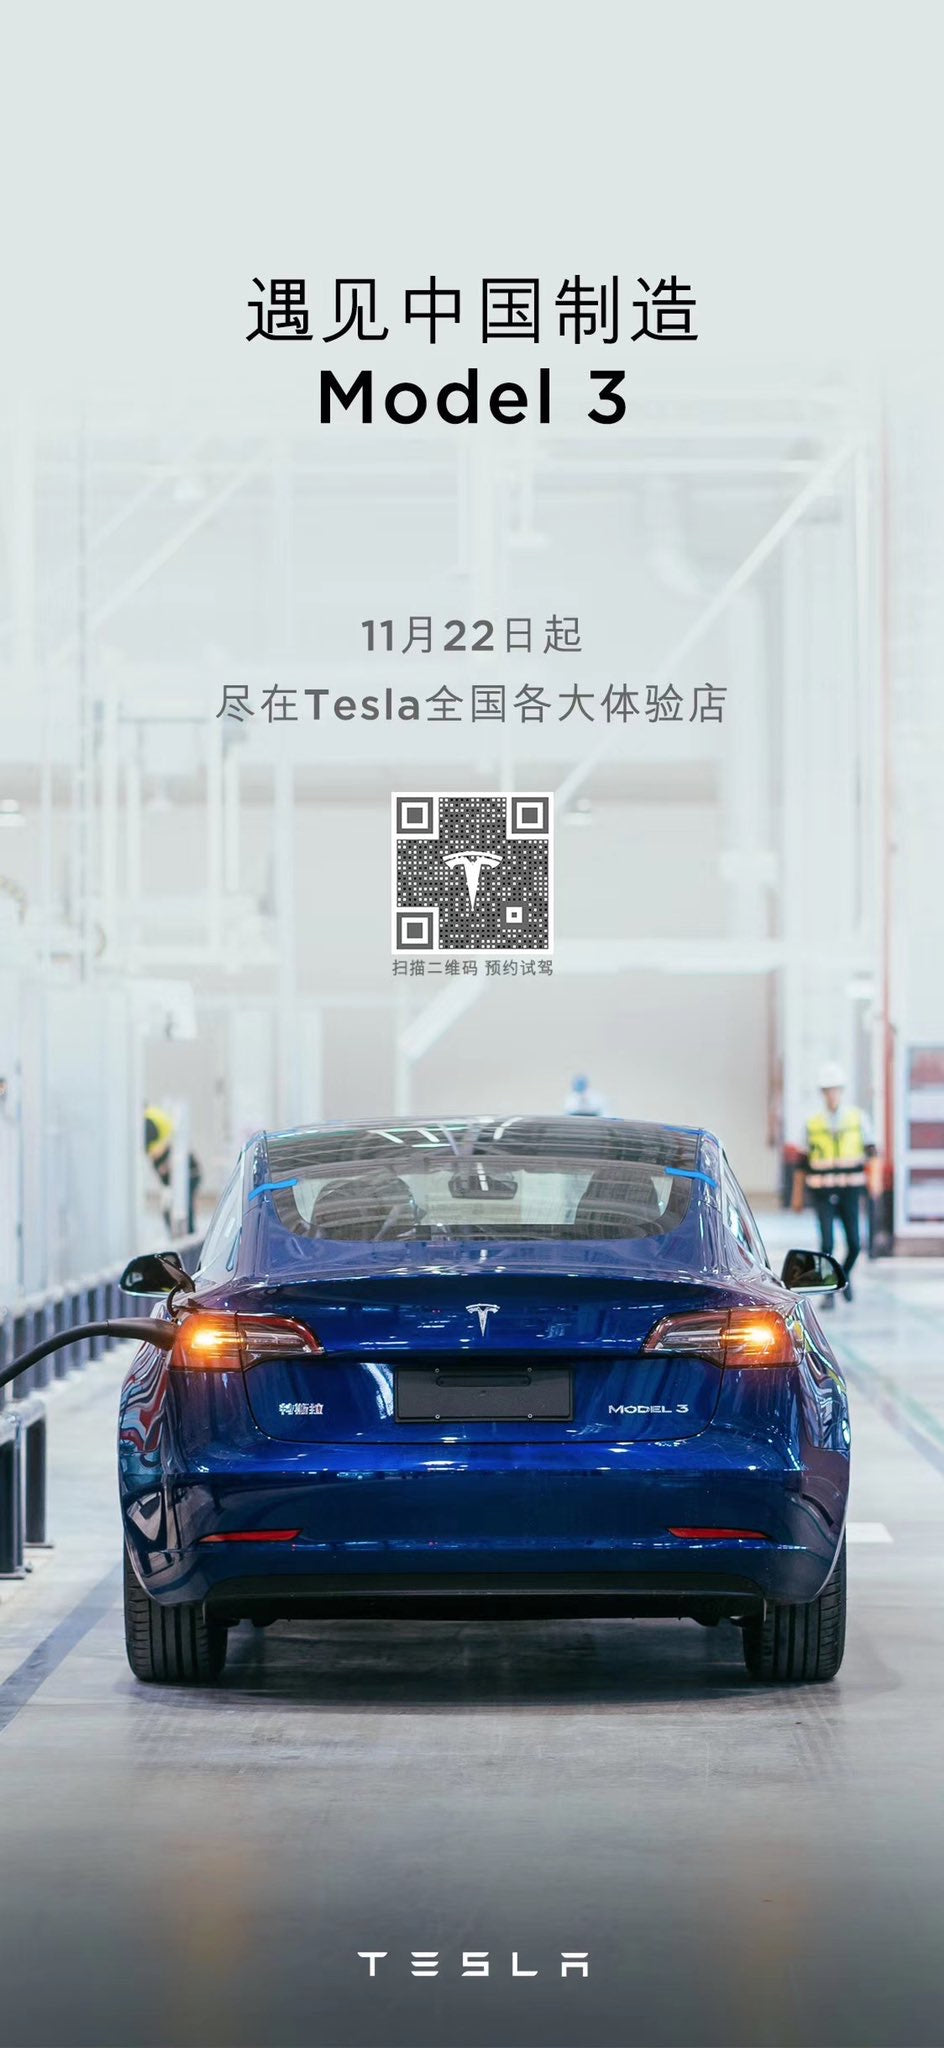 Made in China Tesla Model 3 will attend the Guangzhou International Automobile Exhibition which will start on Nov 22